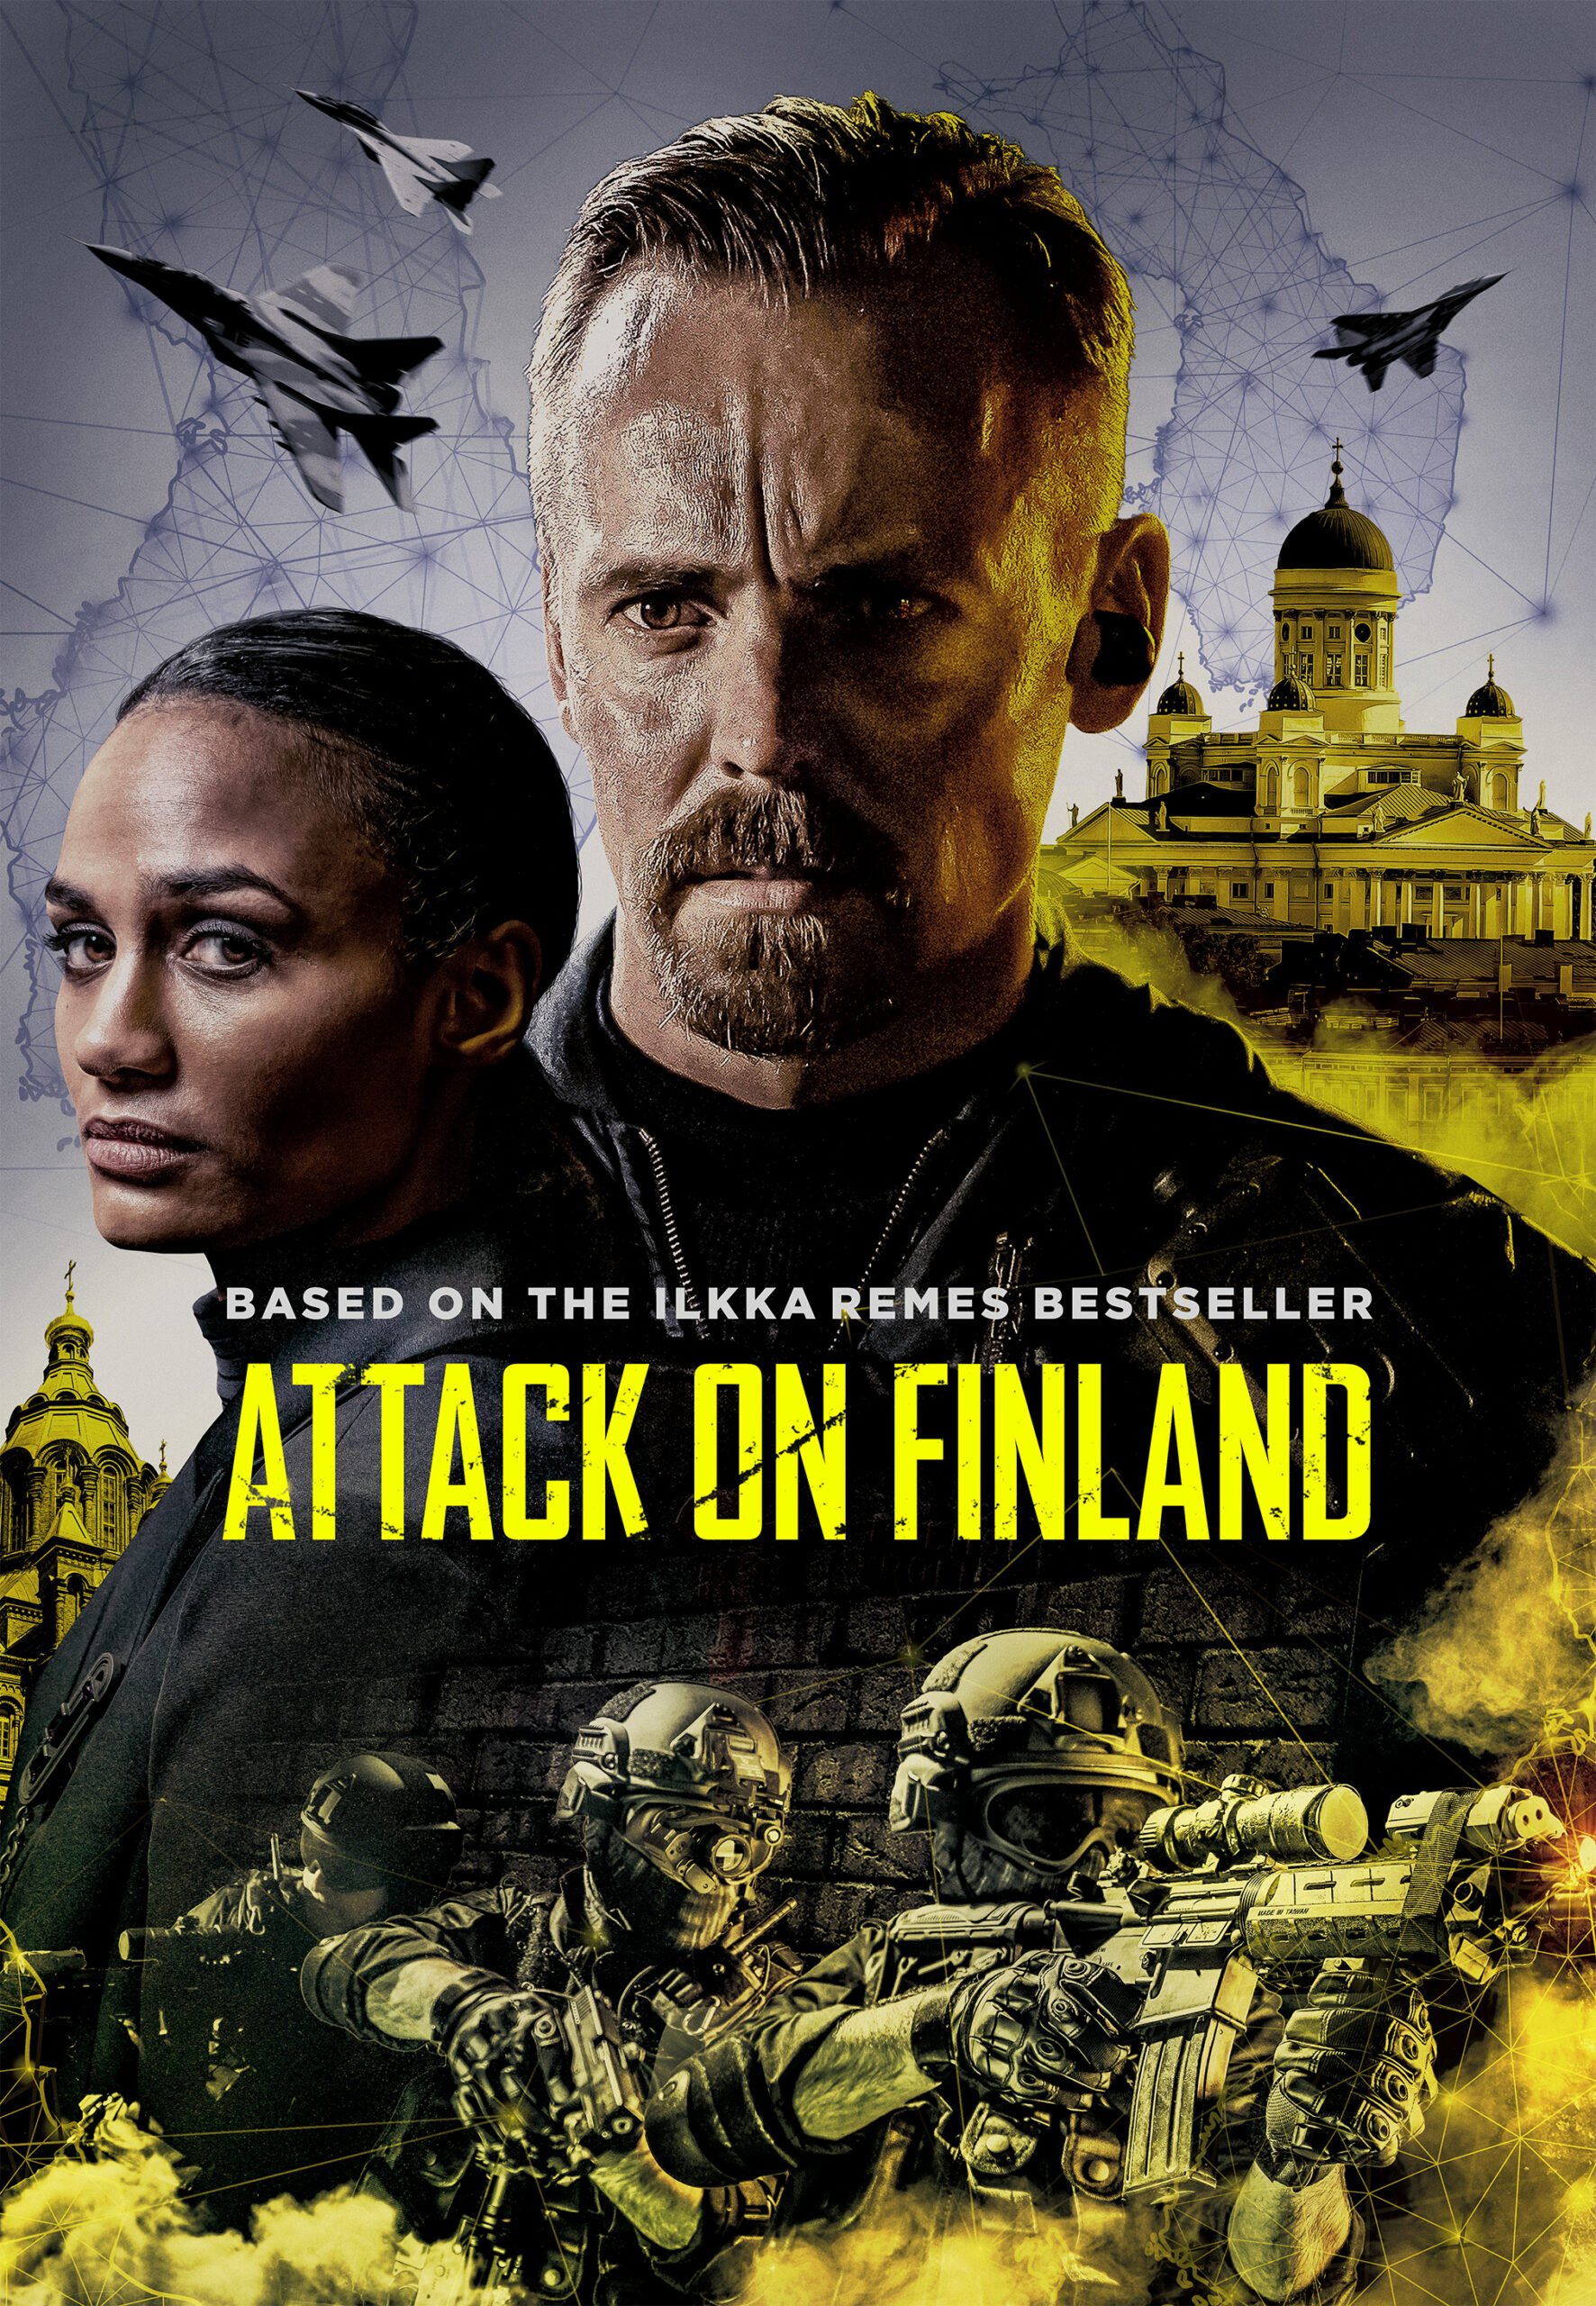 Attack on Finland Movie 2022, Official Trailer, Release Date, HD Poster